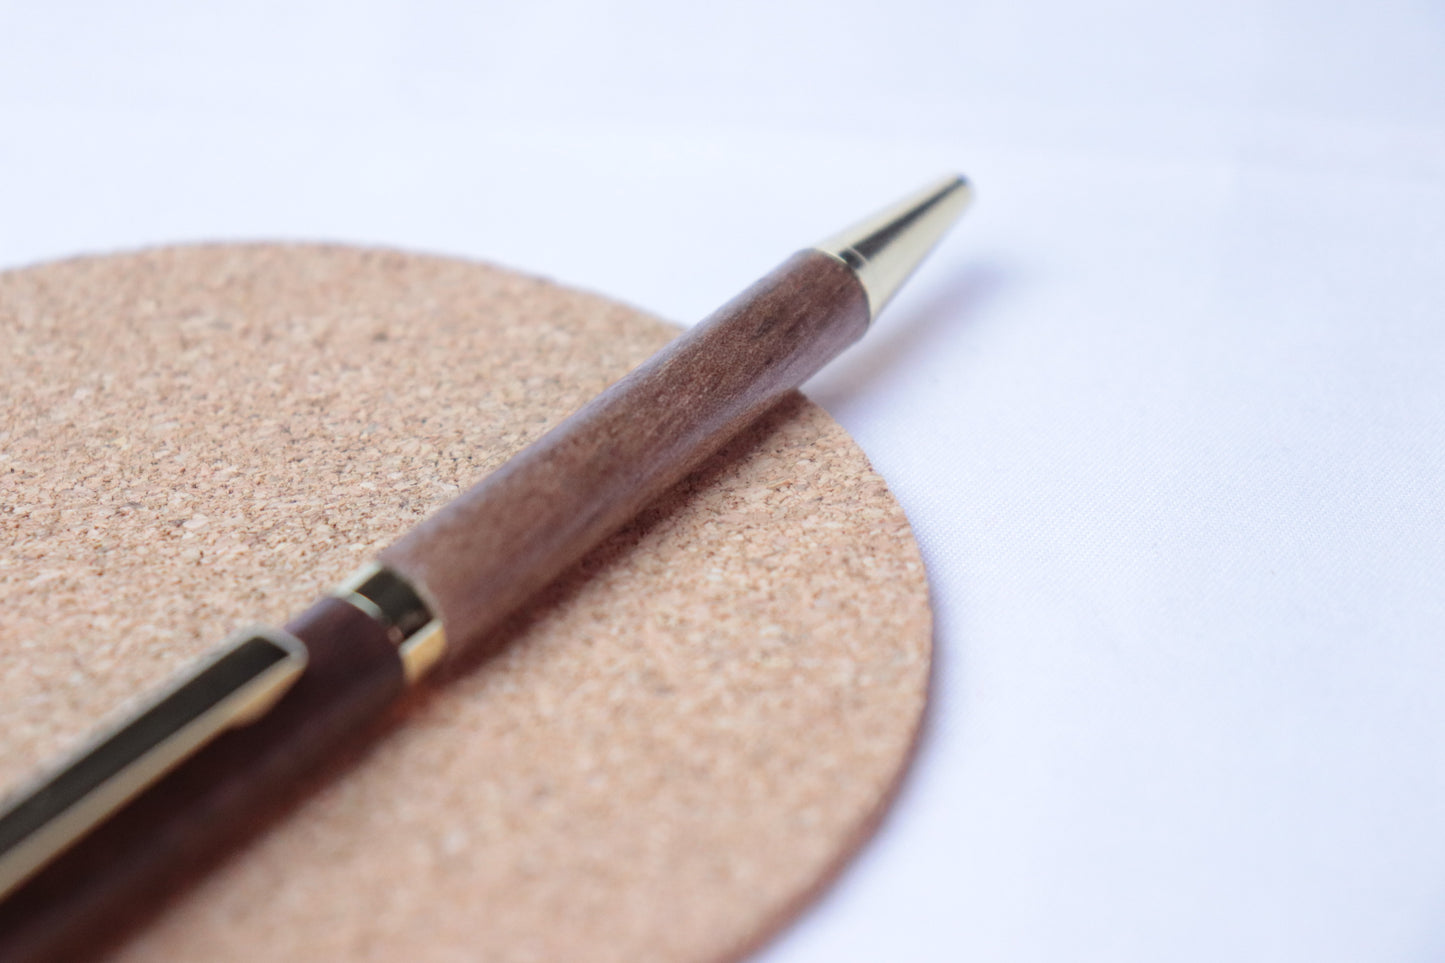 Hand-Crafted Pen